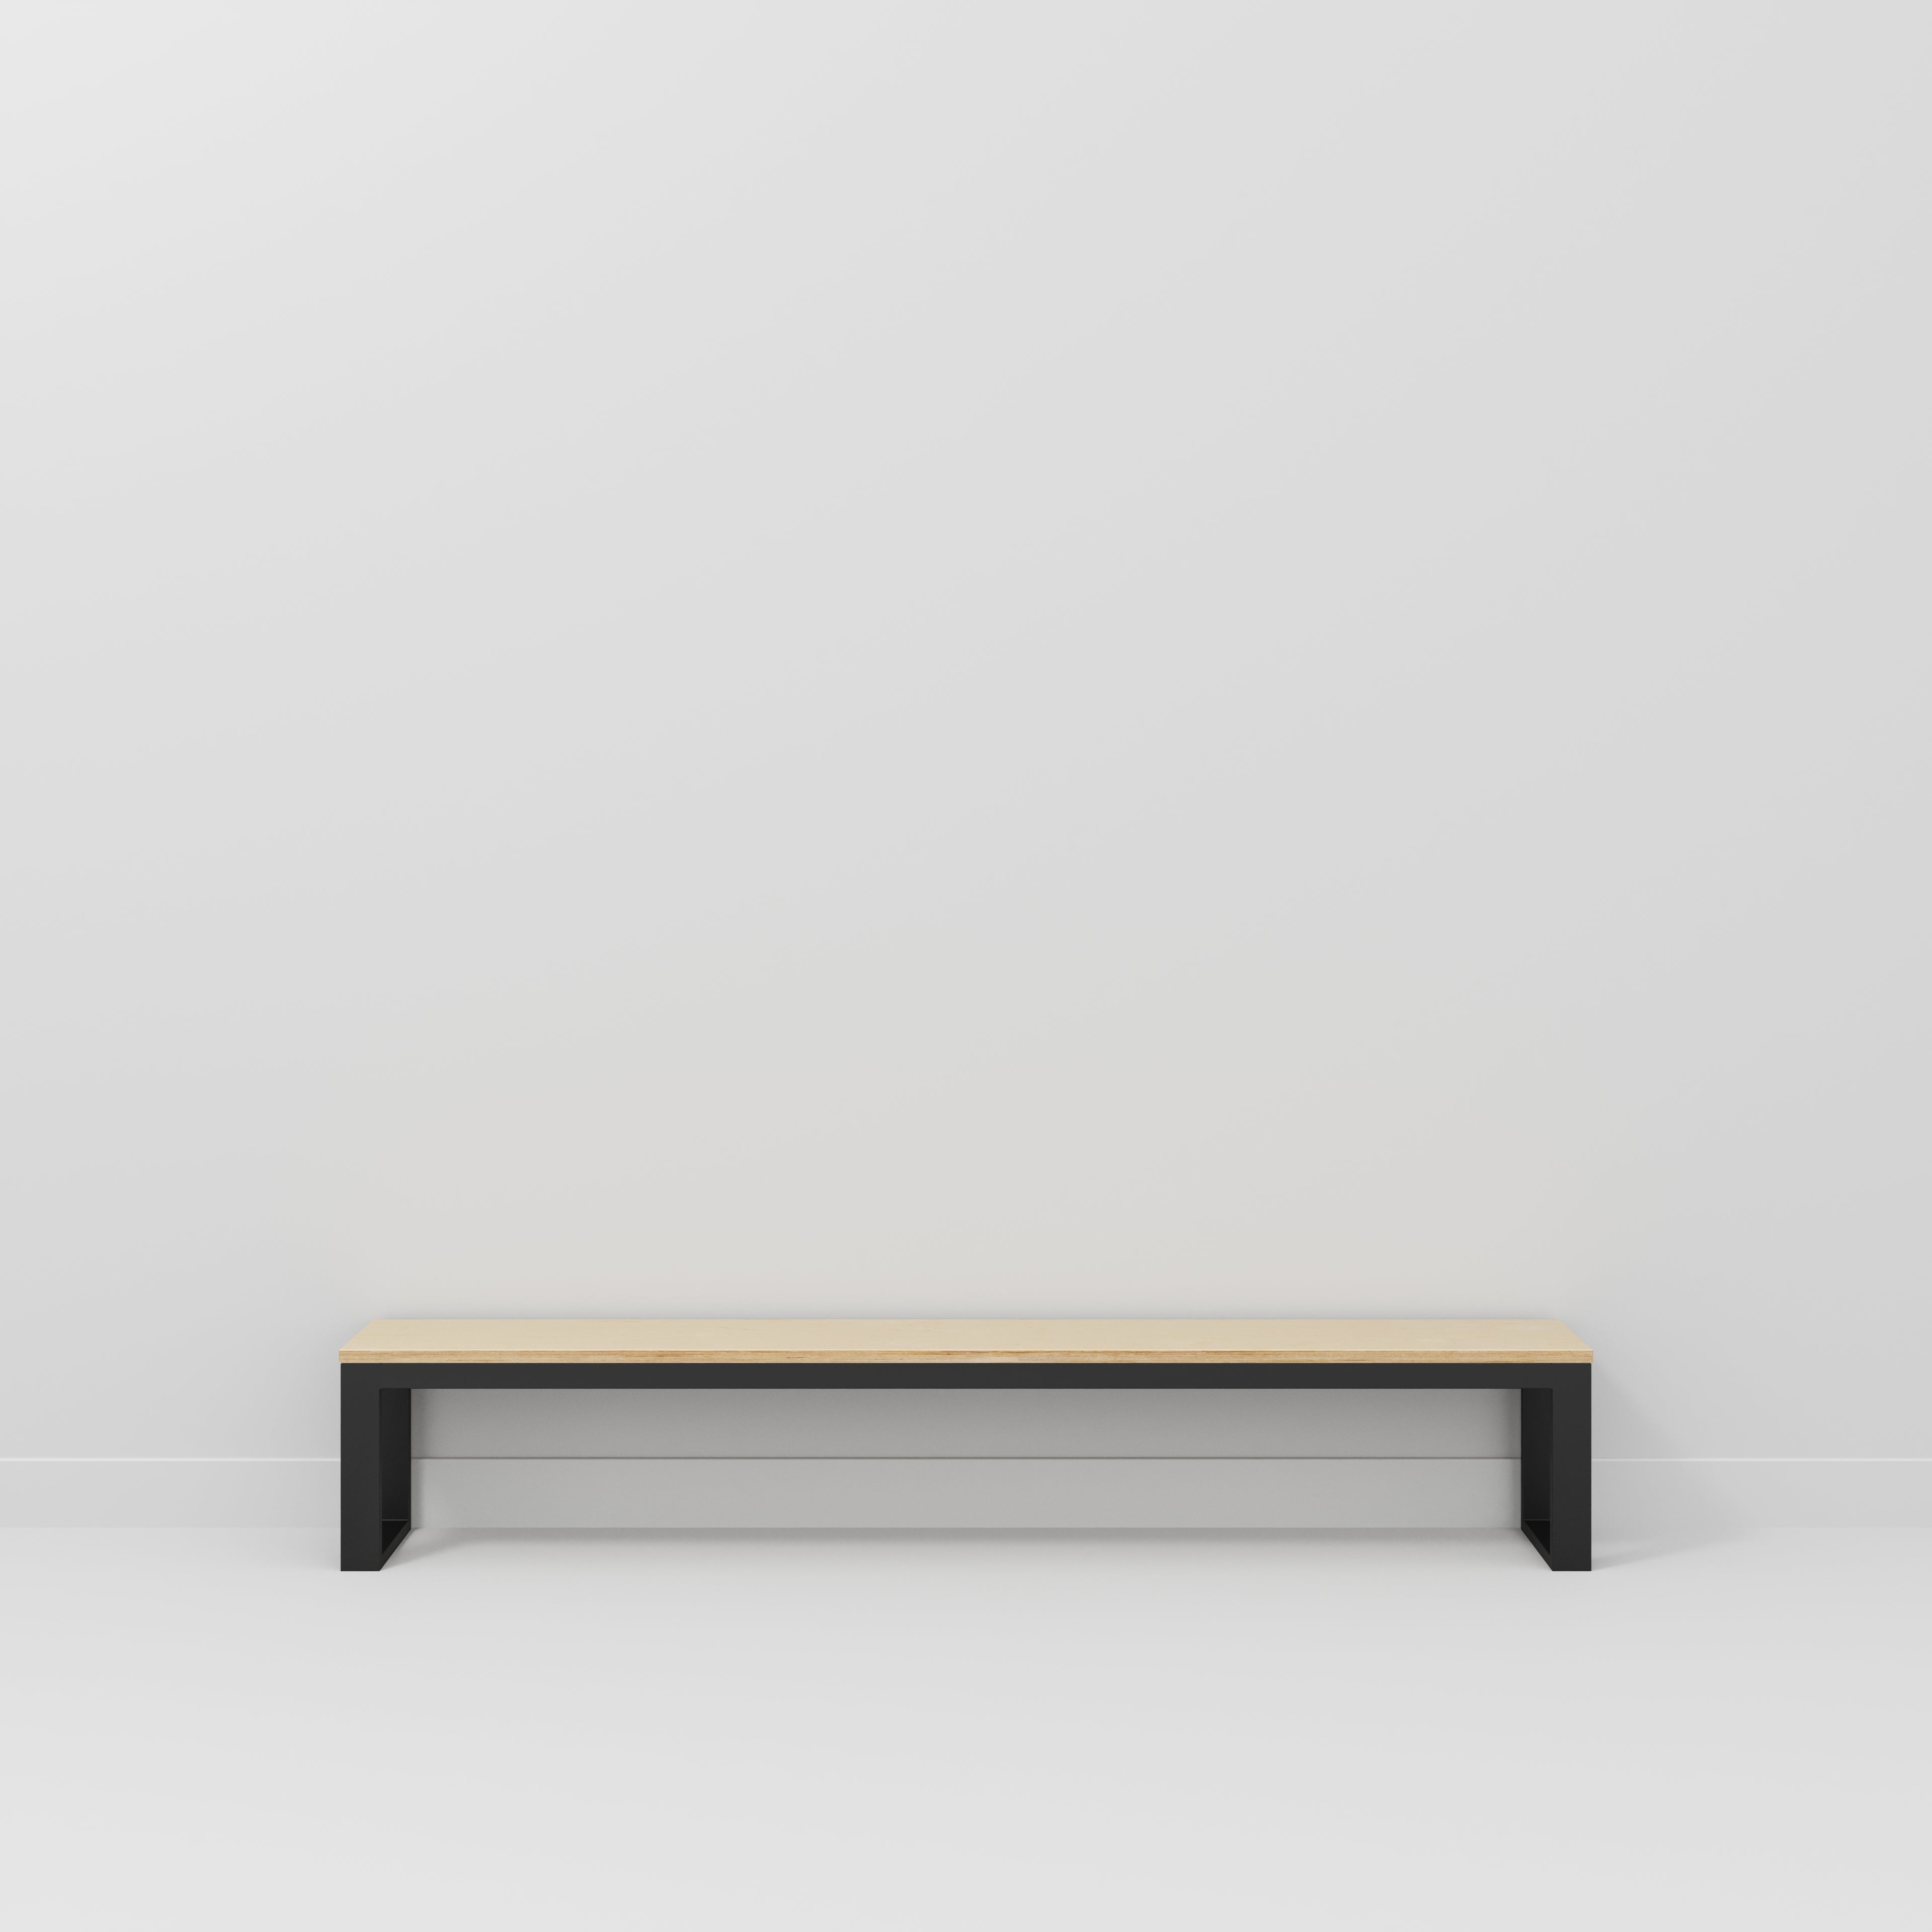 Bench Seat with Black Industrial Frame - Plywood Birch - 2400(w) x 325(d)